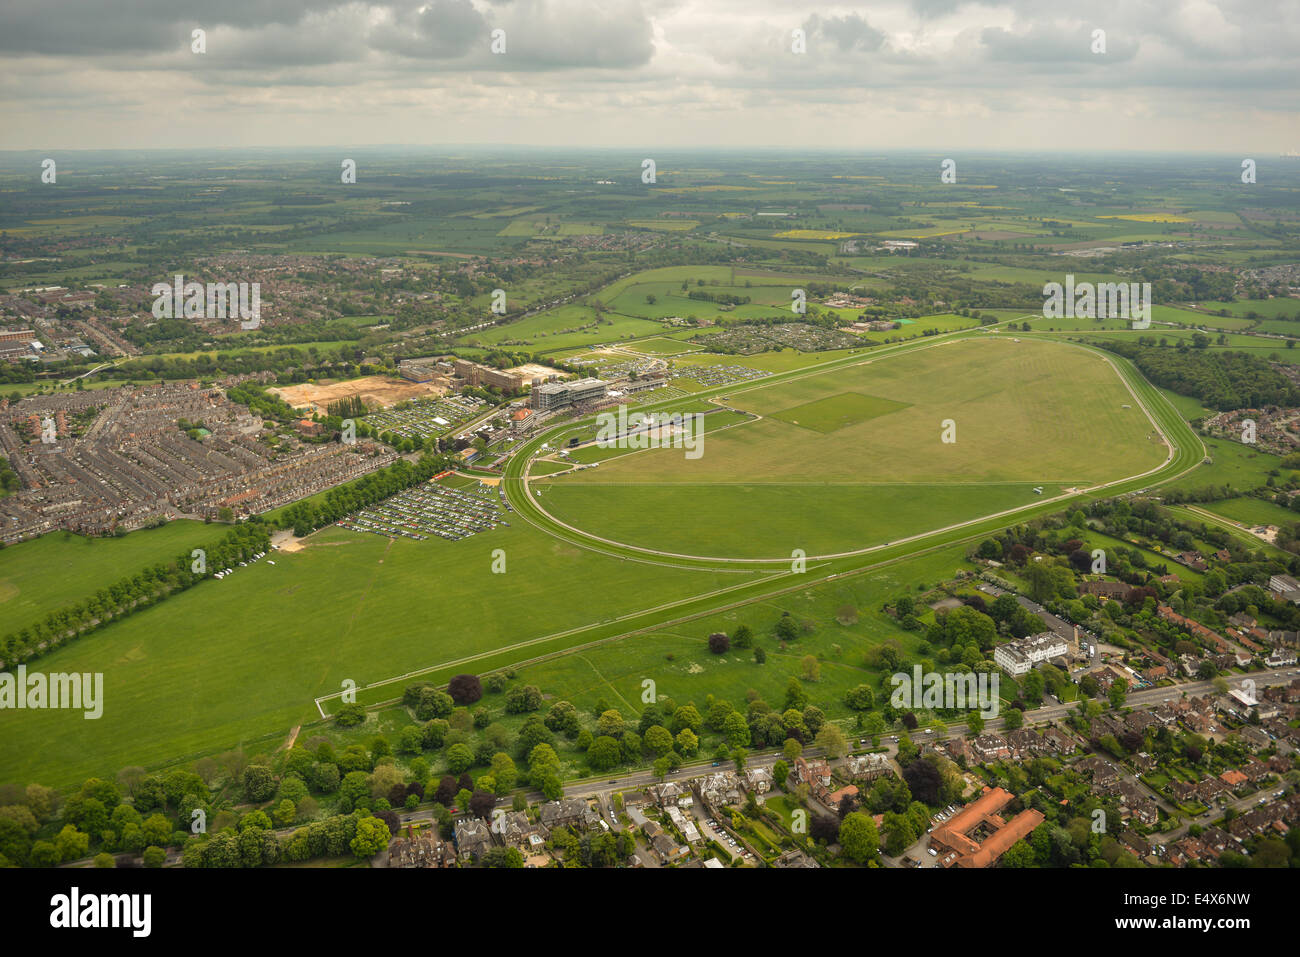 An aerial view showing York Racecourse and surroundings on an overcast day. Stock Photo